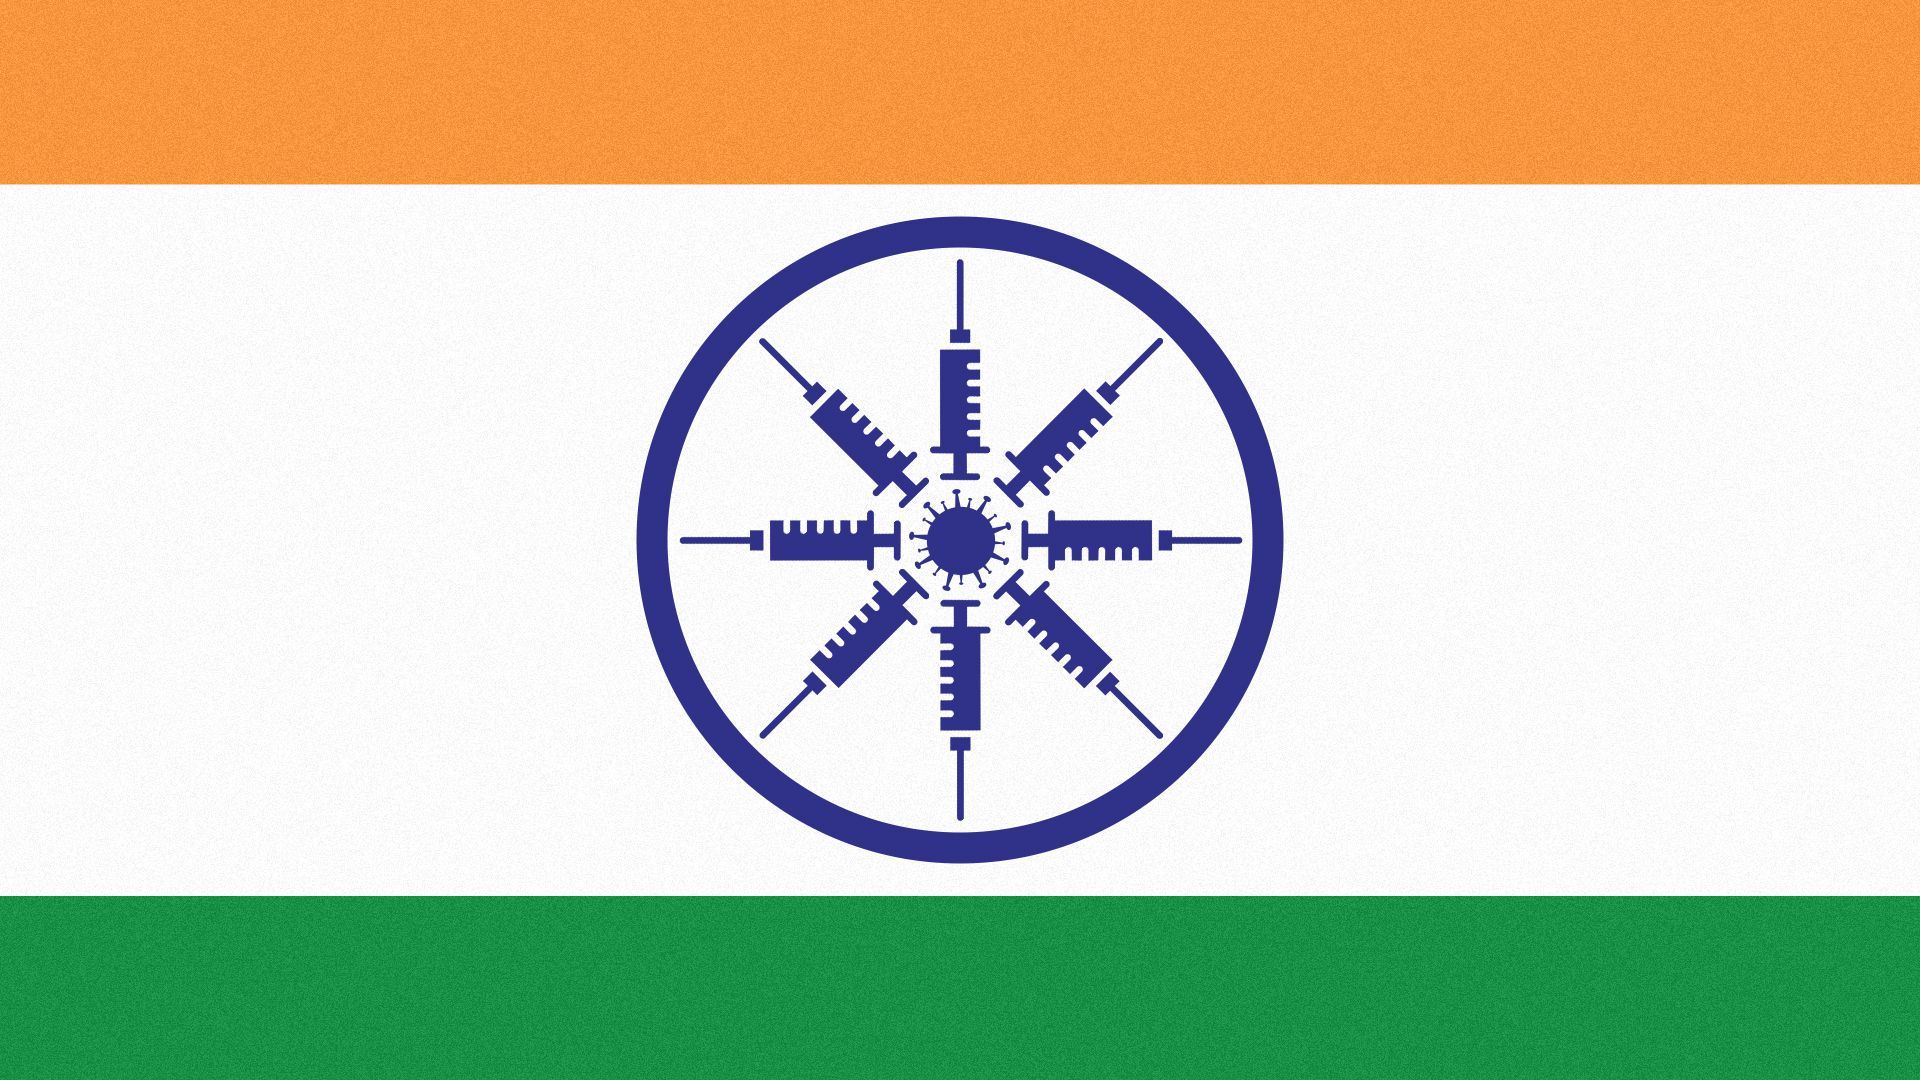 Illustration of India's flag, with syringes forming the spokes of the wheel symbol.